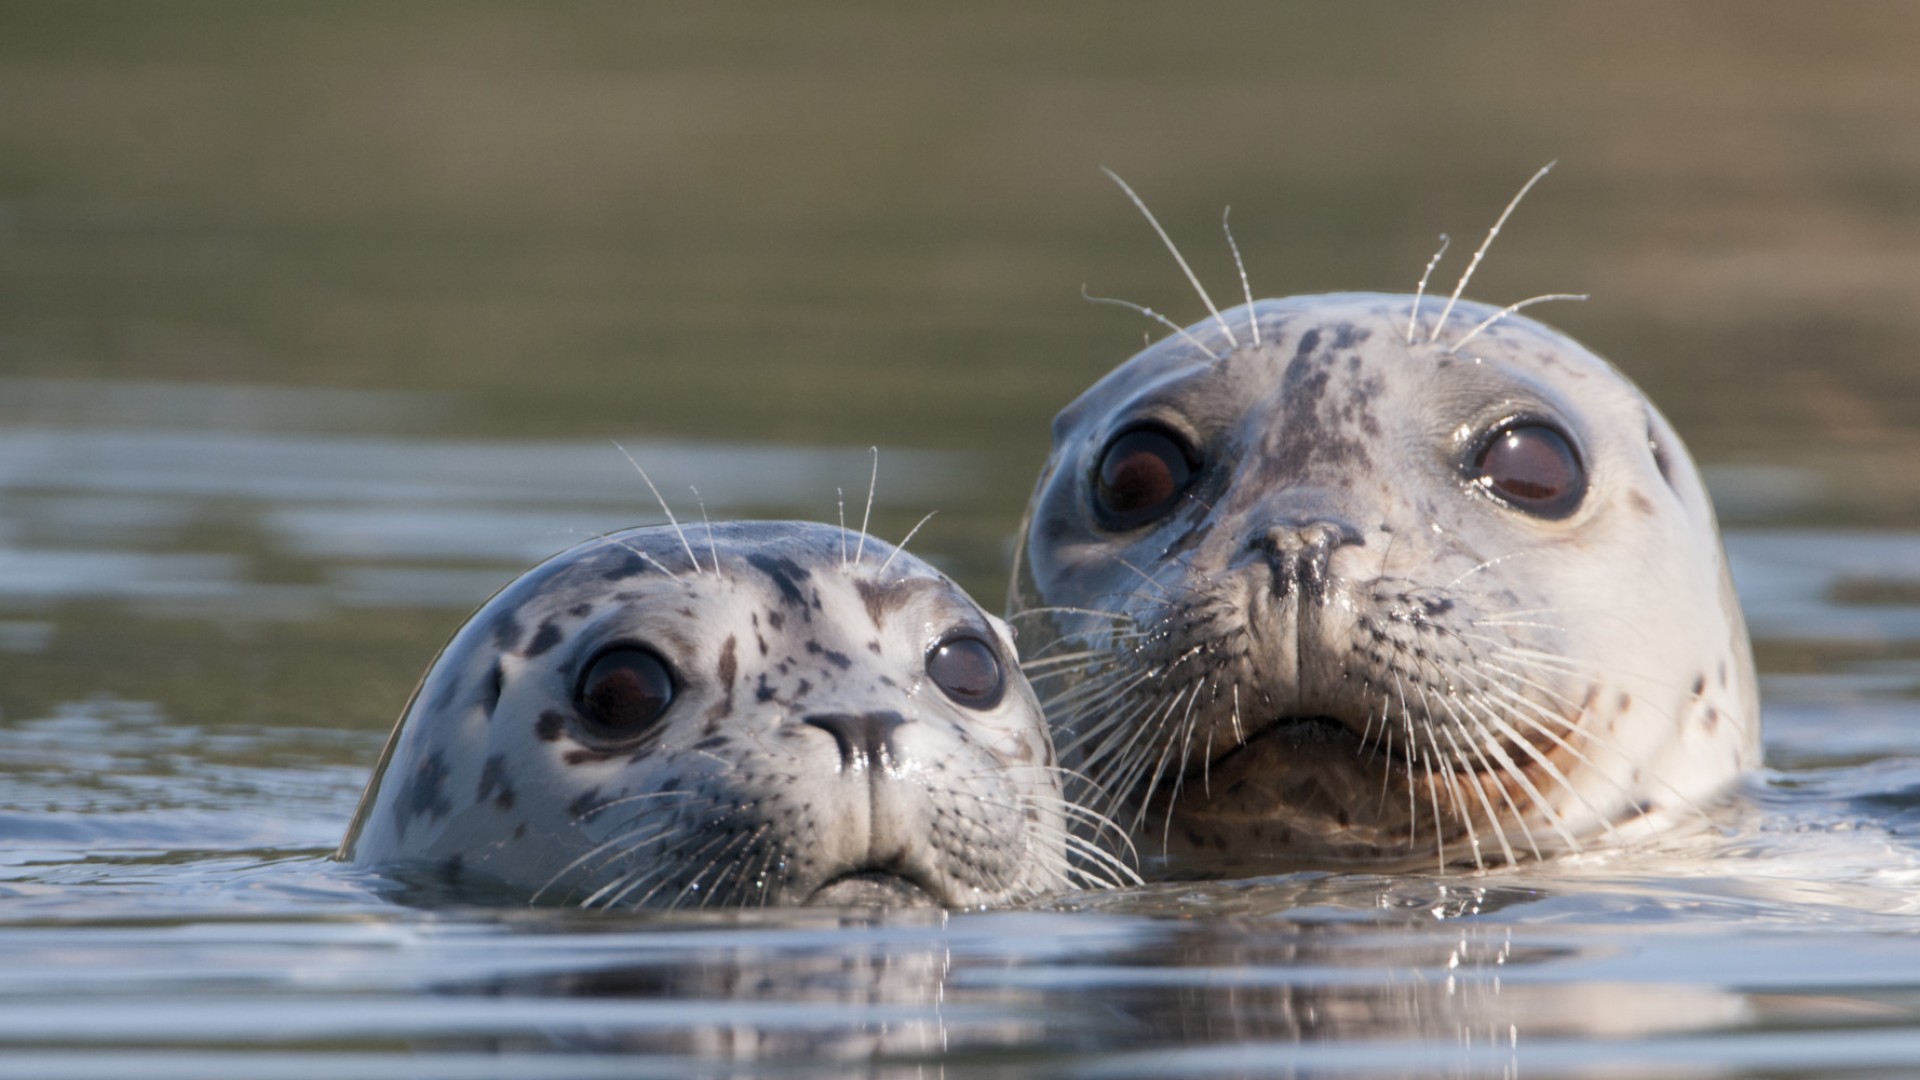 Close up on two harbor seals sticking their eyes and nose out of the water and looking directly at the camera